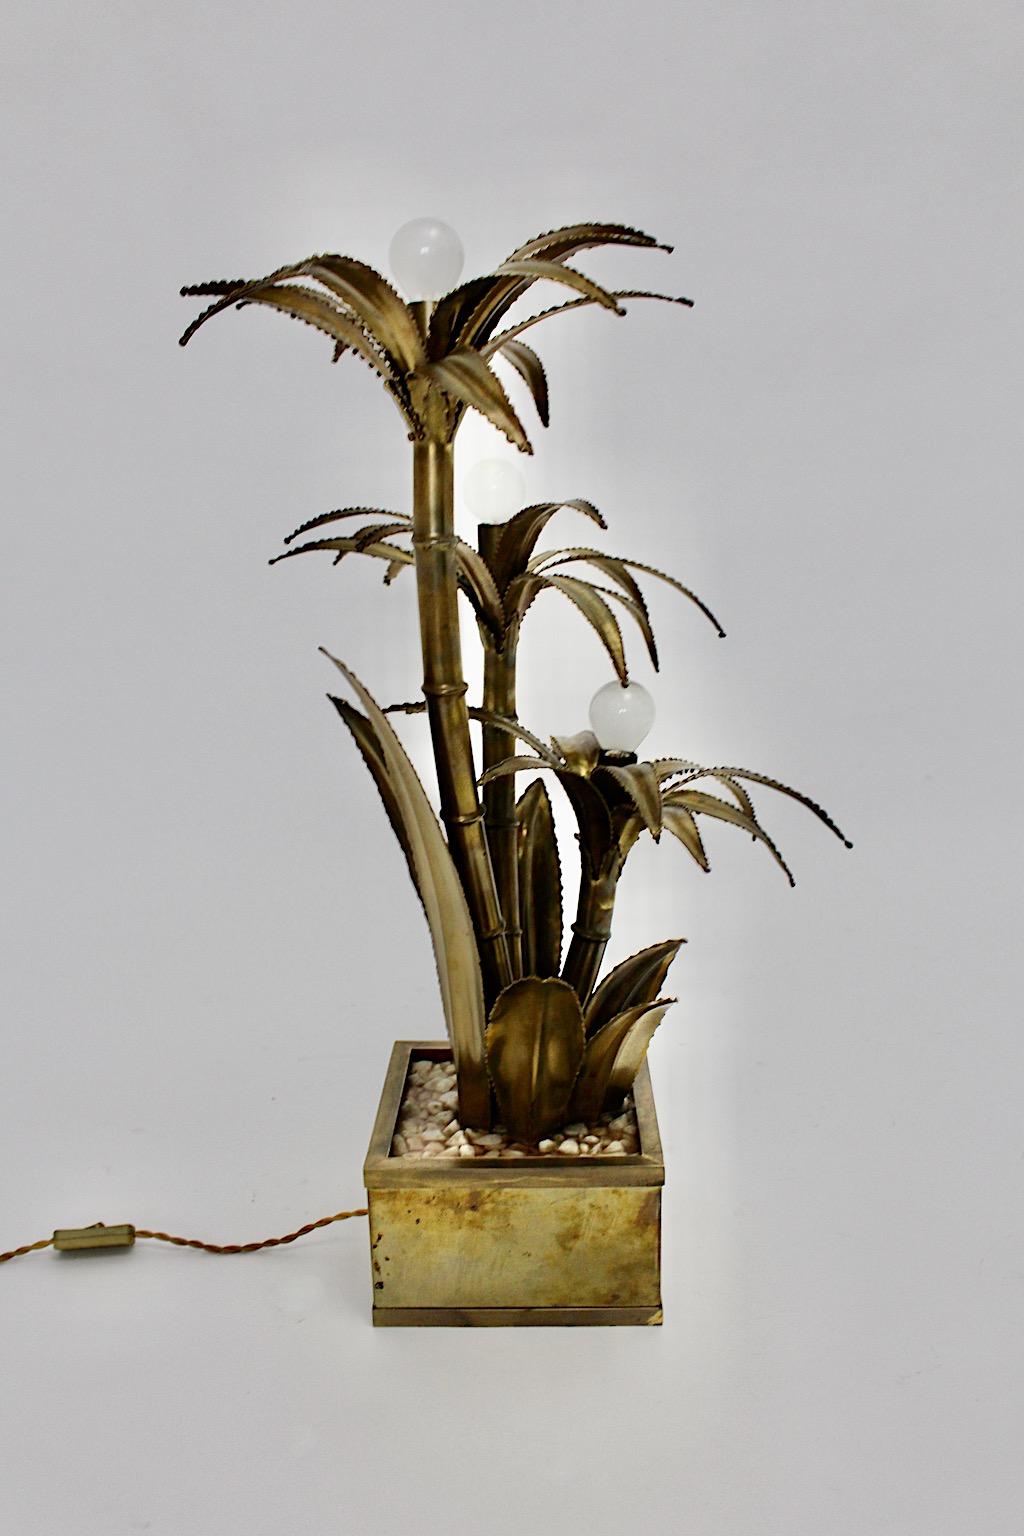 Maison Jansen vintage brass table lamp, which was designed and executed 1970s France.
While the table lamp shows a beautiful shape formed like a palm tree with leaves, the brass base features small marble stones cast in lucite.
The table lamp was